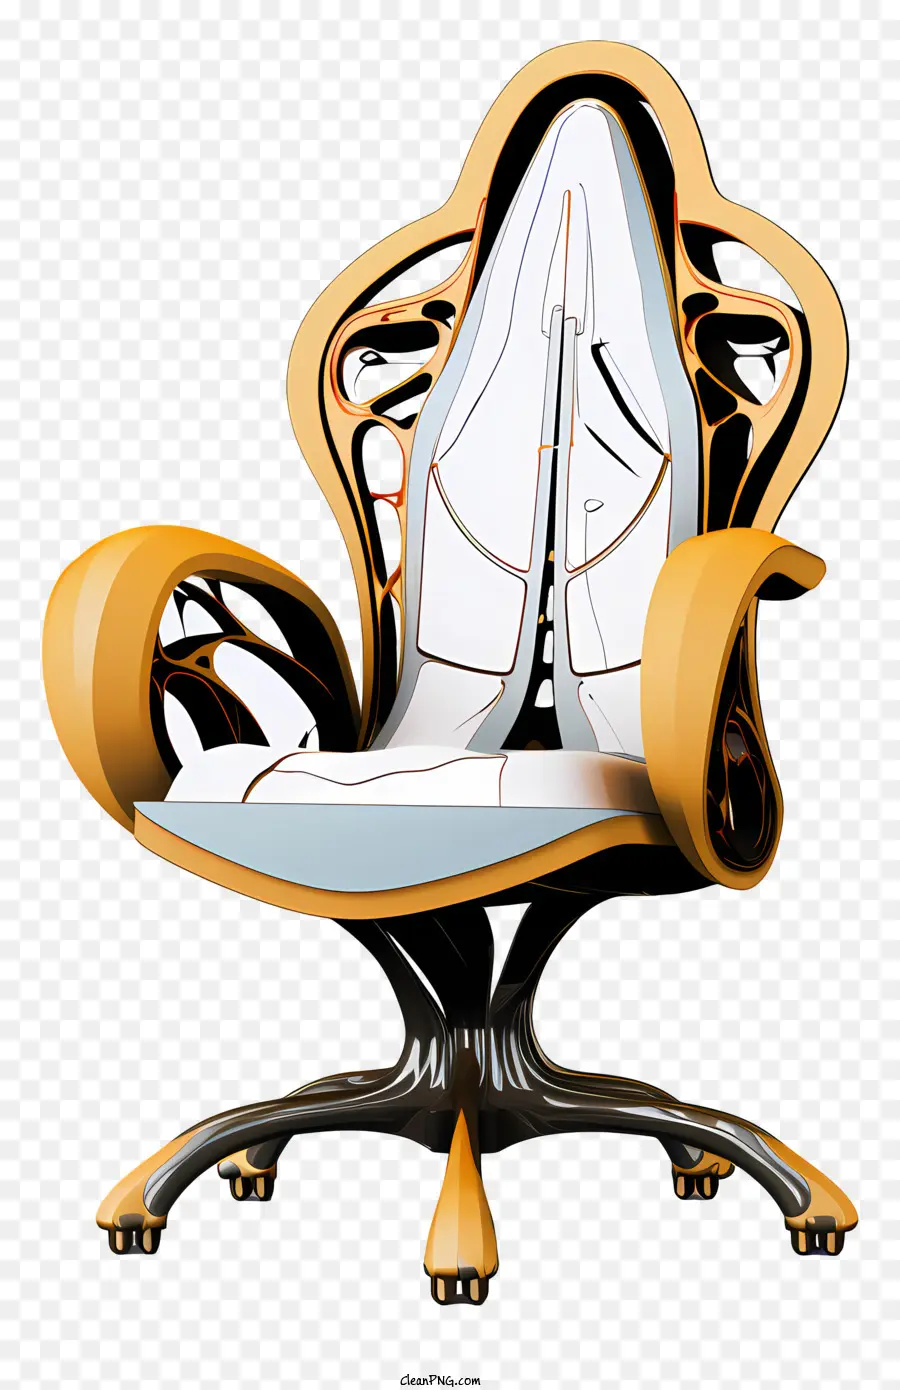 futuristic office chair white and gold design black accents curved back and seat golden trim